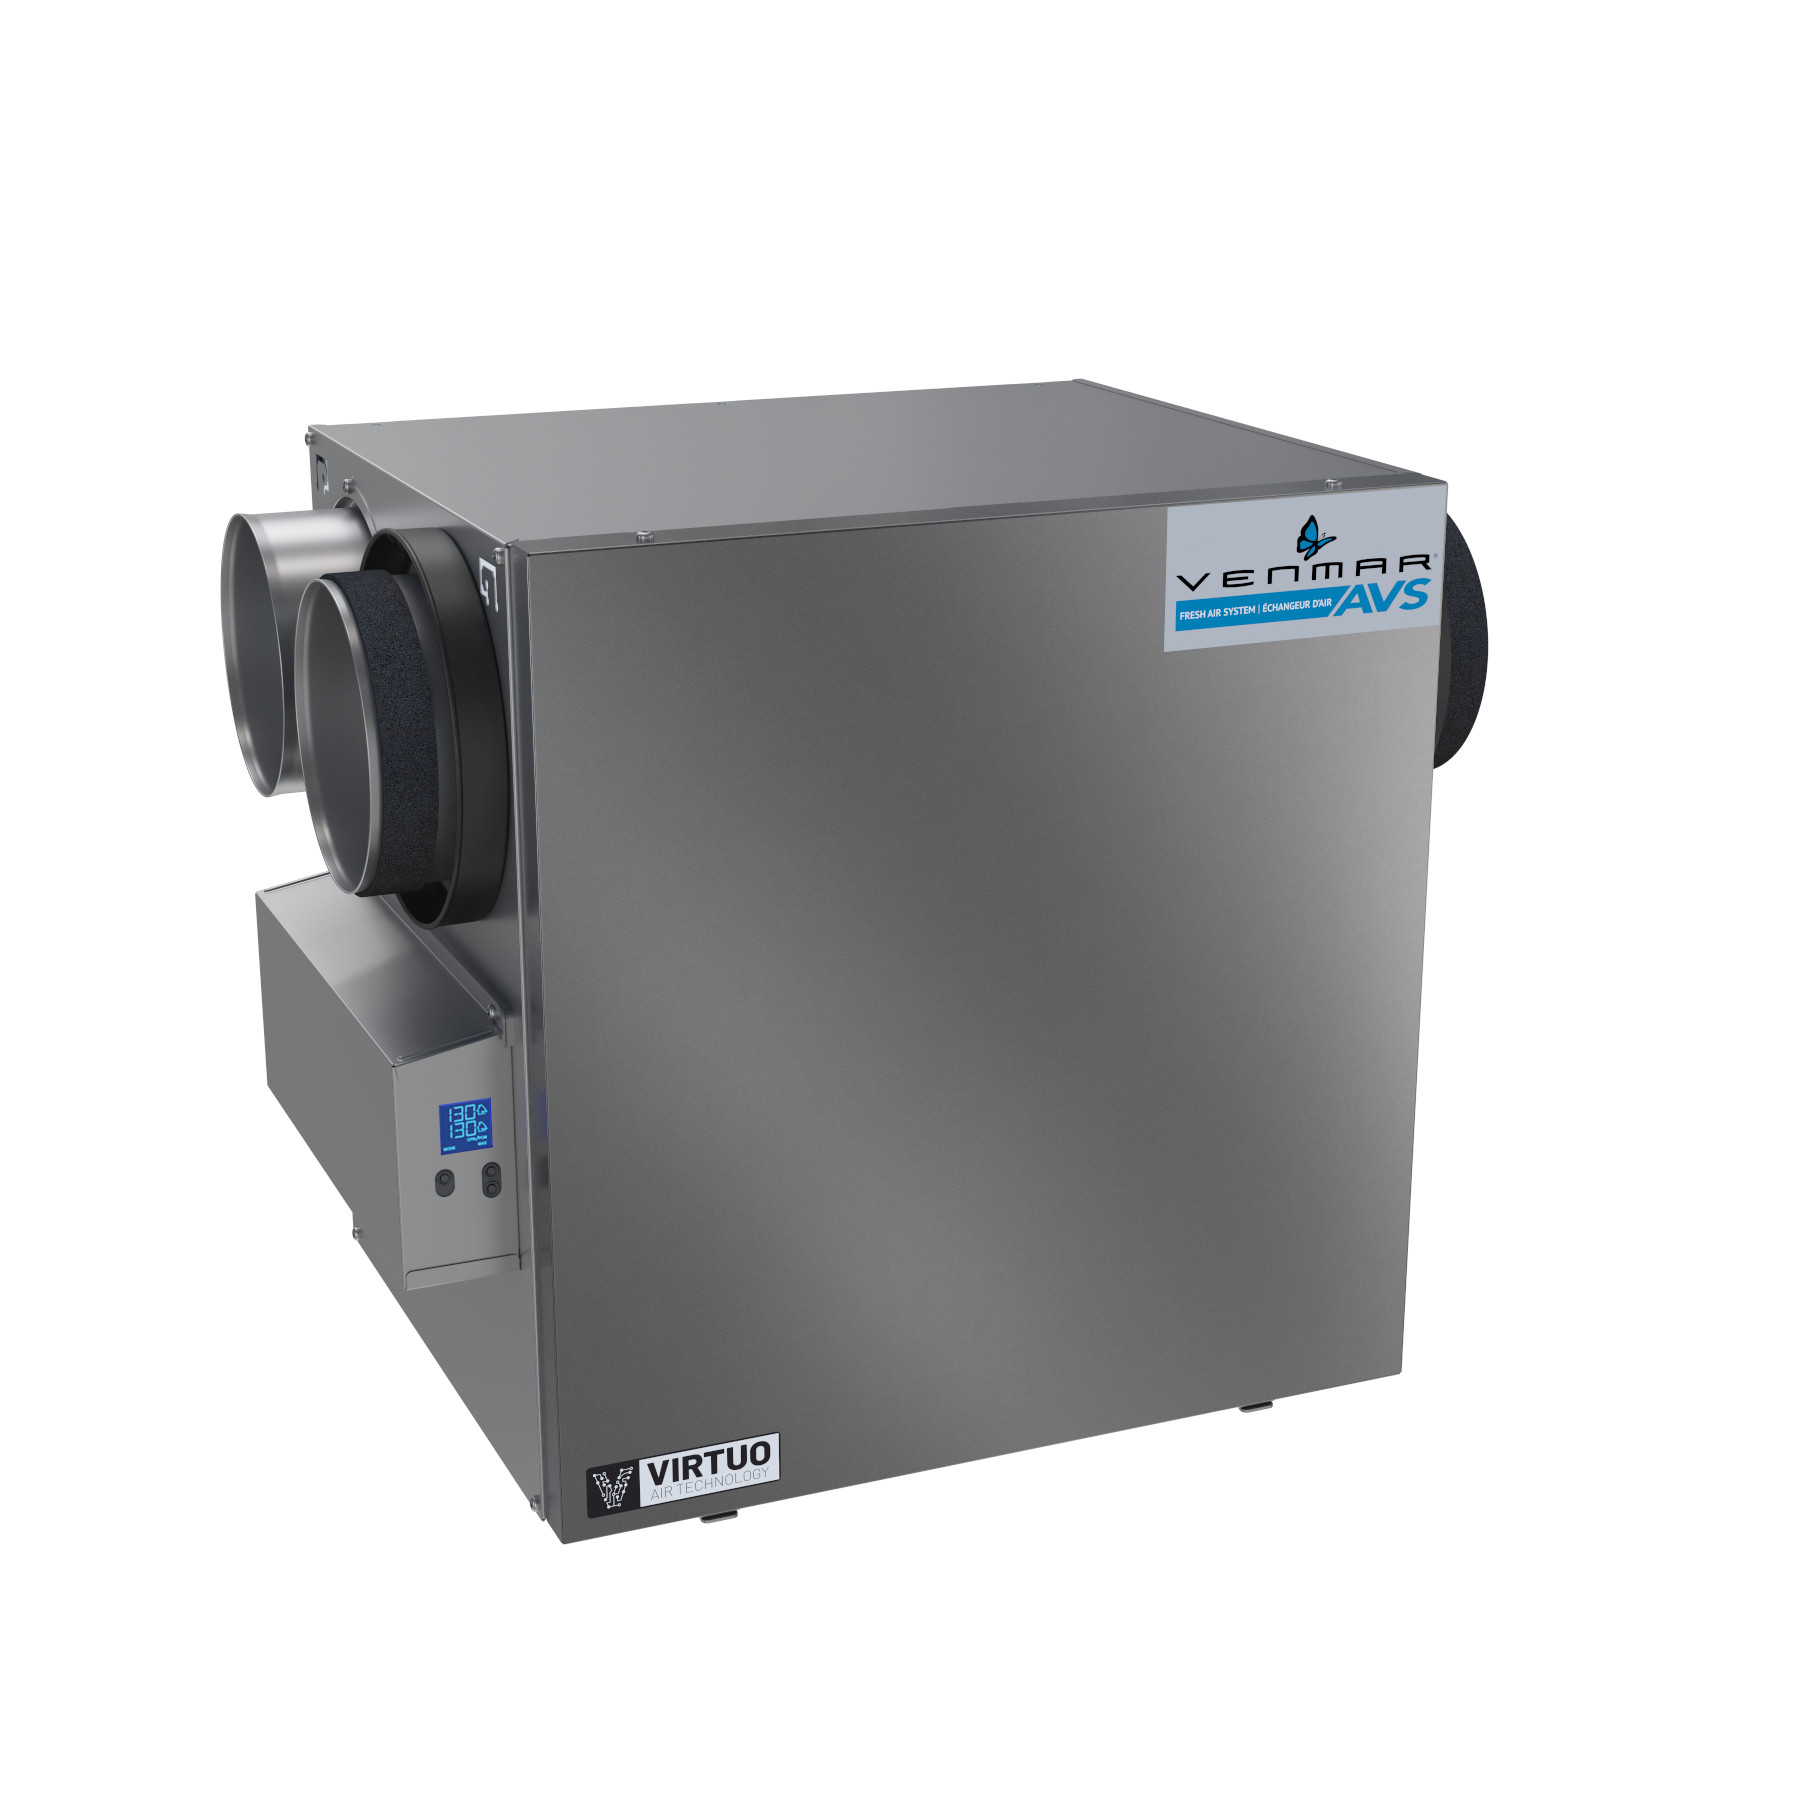 Venmar AVS® N Series HRV 131 CFM 68% SRE with Virtuo Air Technology™ Side ports